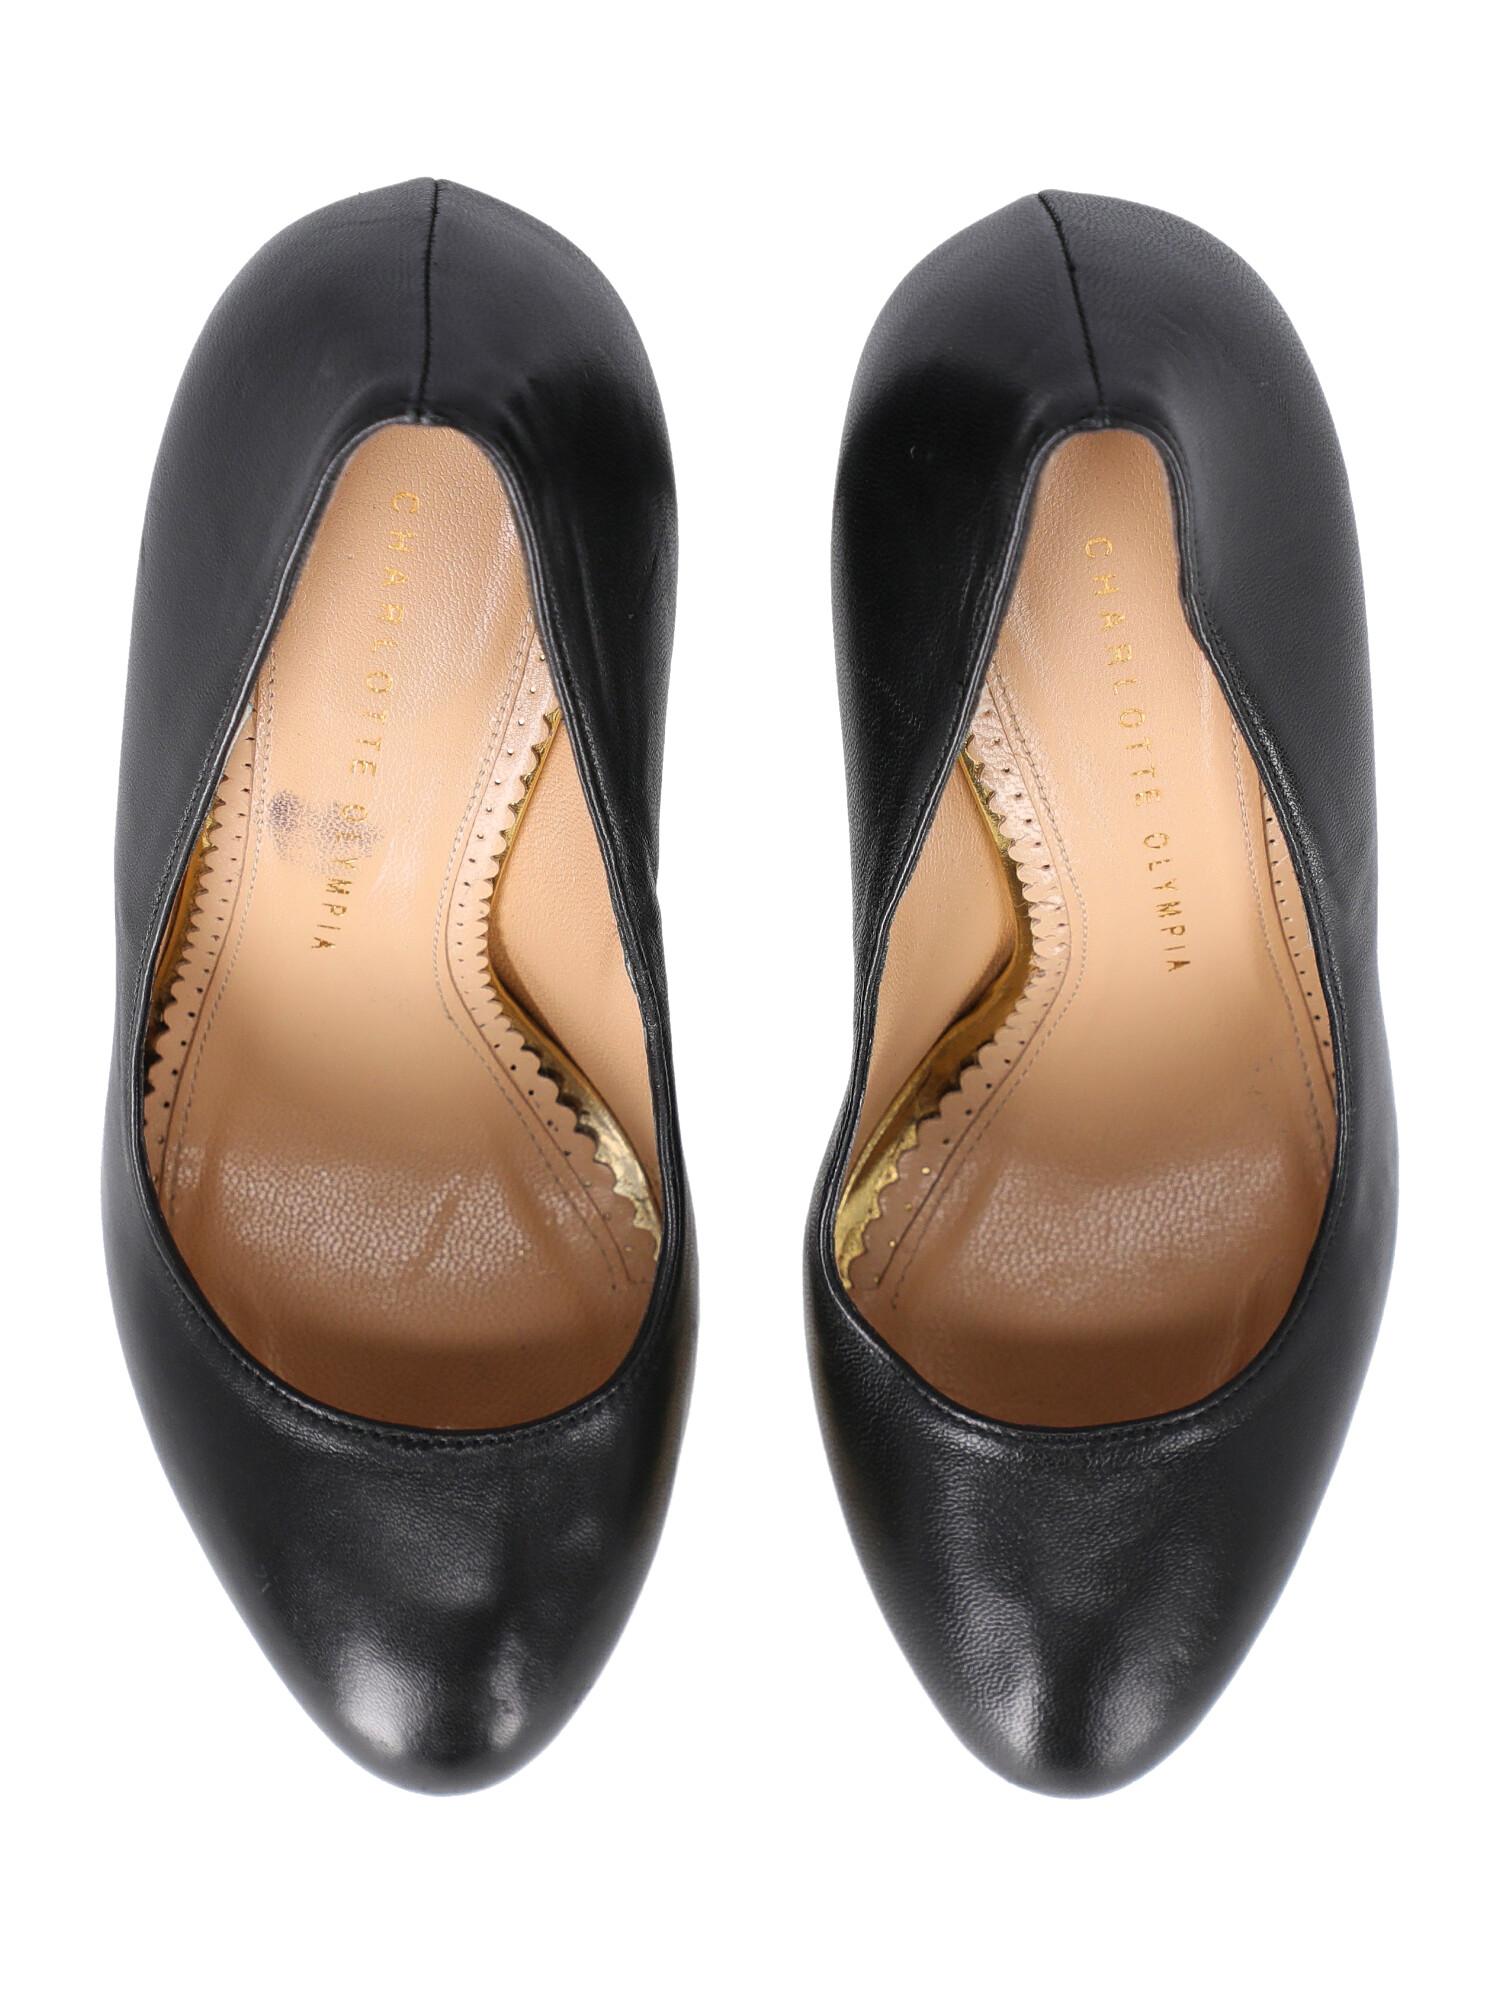 Charlotte Olympia Woman Pumps Black Leather IT 36 For Sale 2